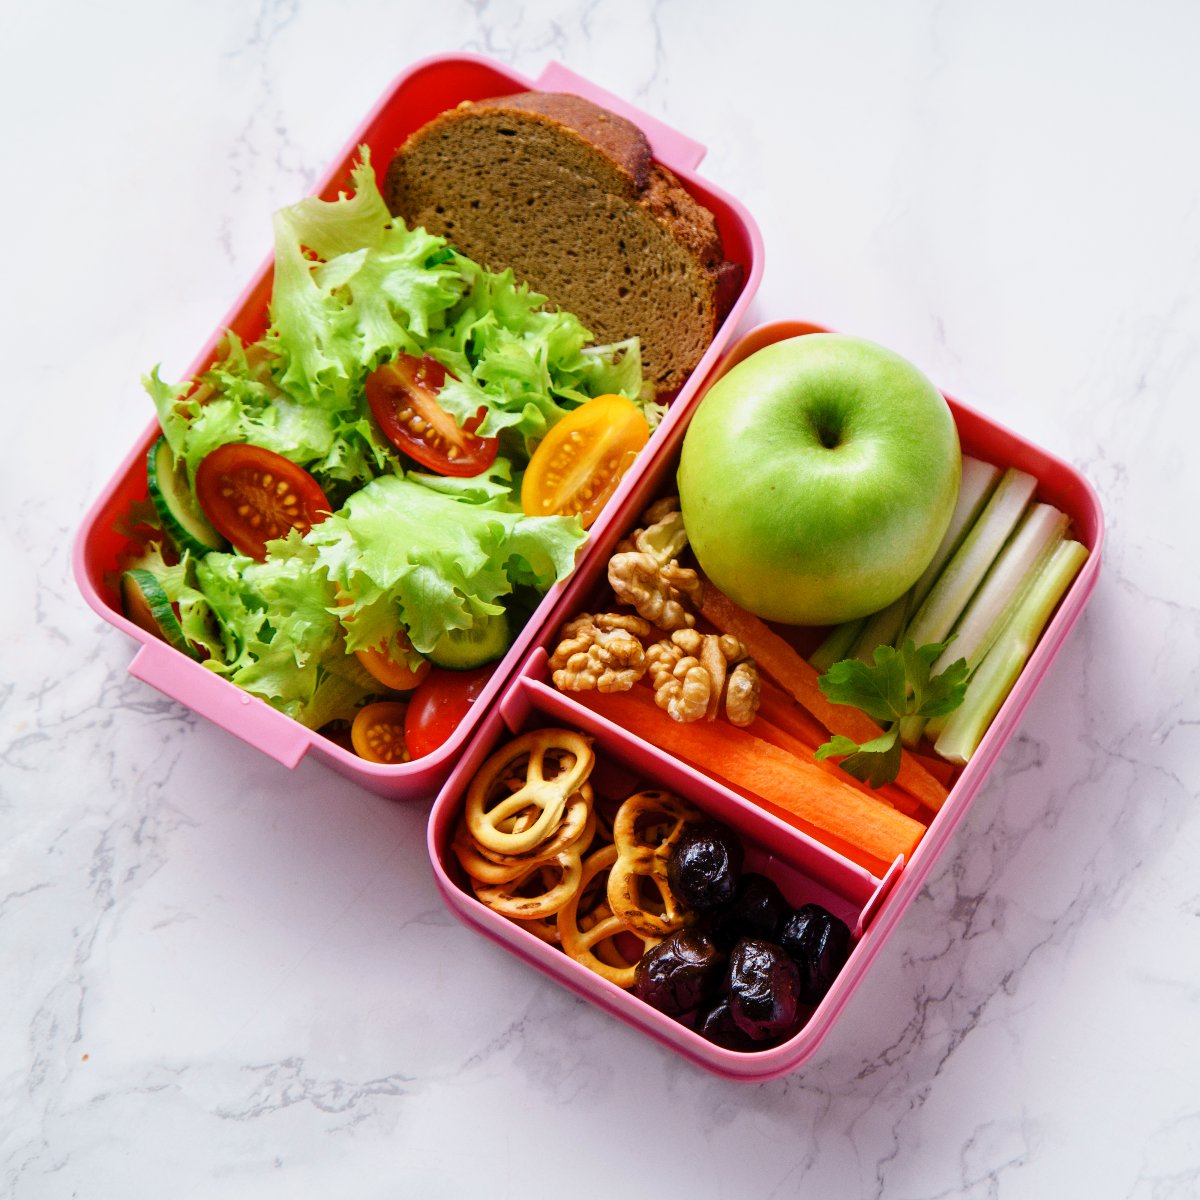 A lunch box full of snacks, including salad, pretzels, nuts and an apple